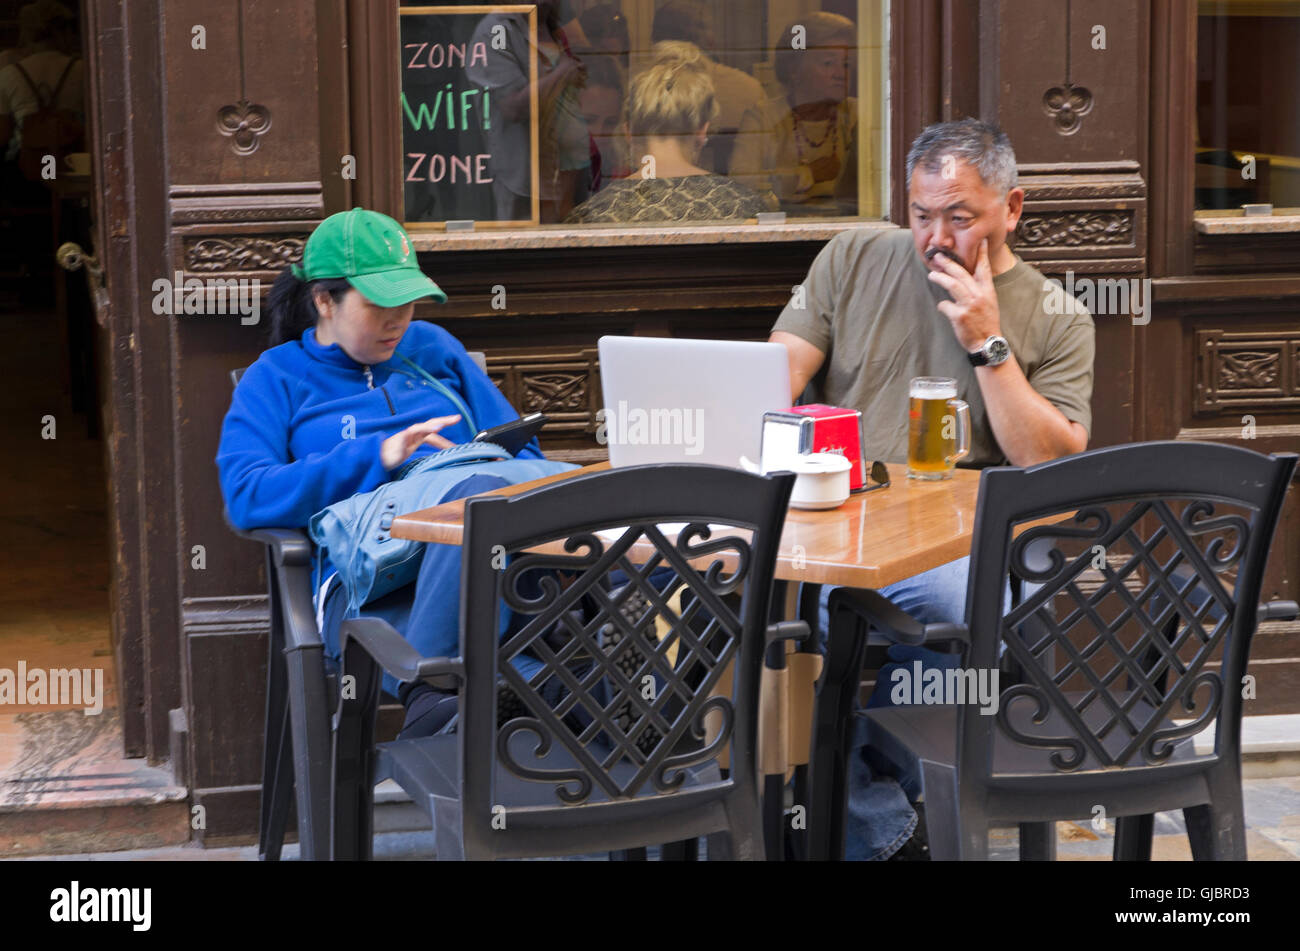 Older asian man and teen girl check internet devices at sidewalk café table. Stock Photo